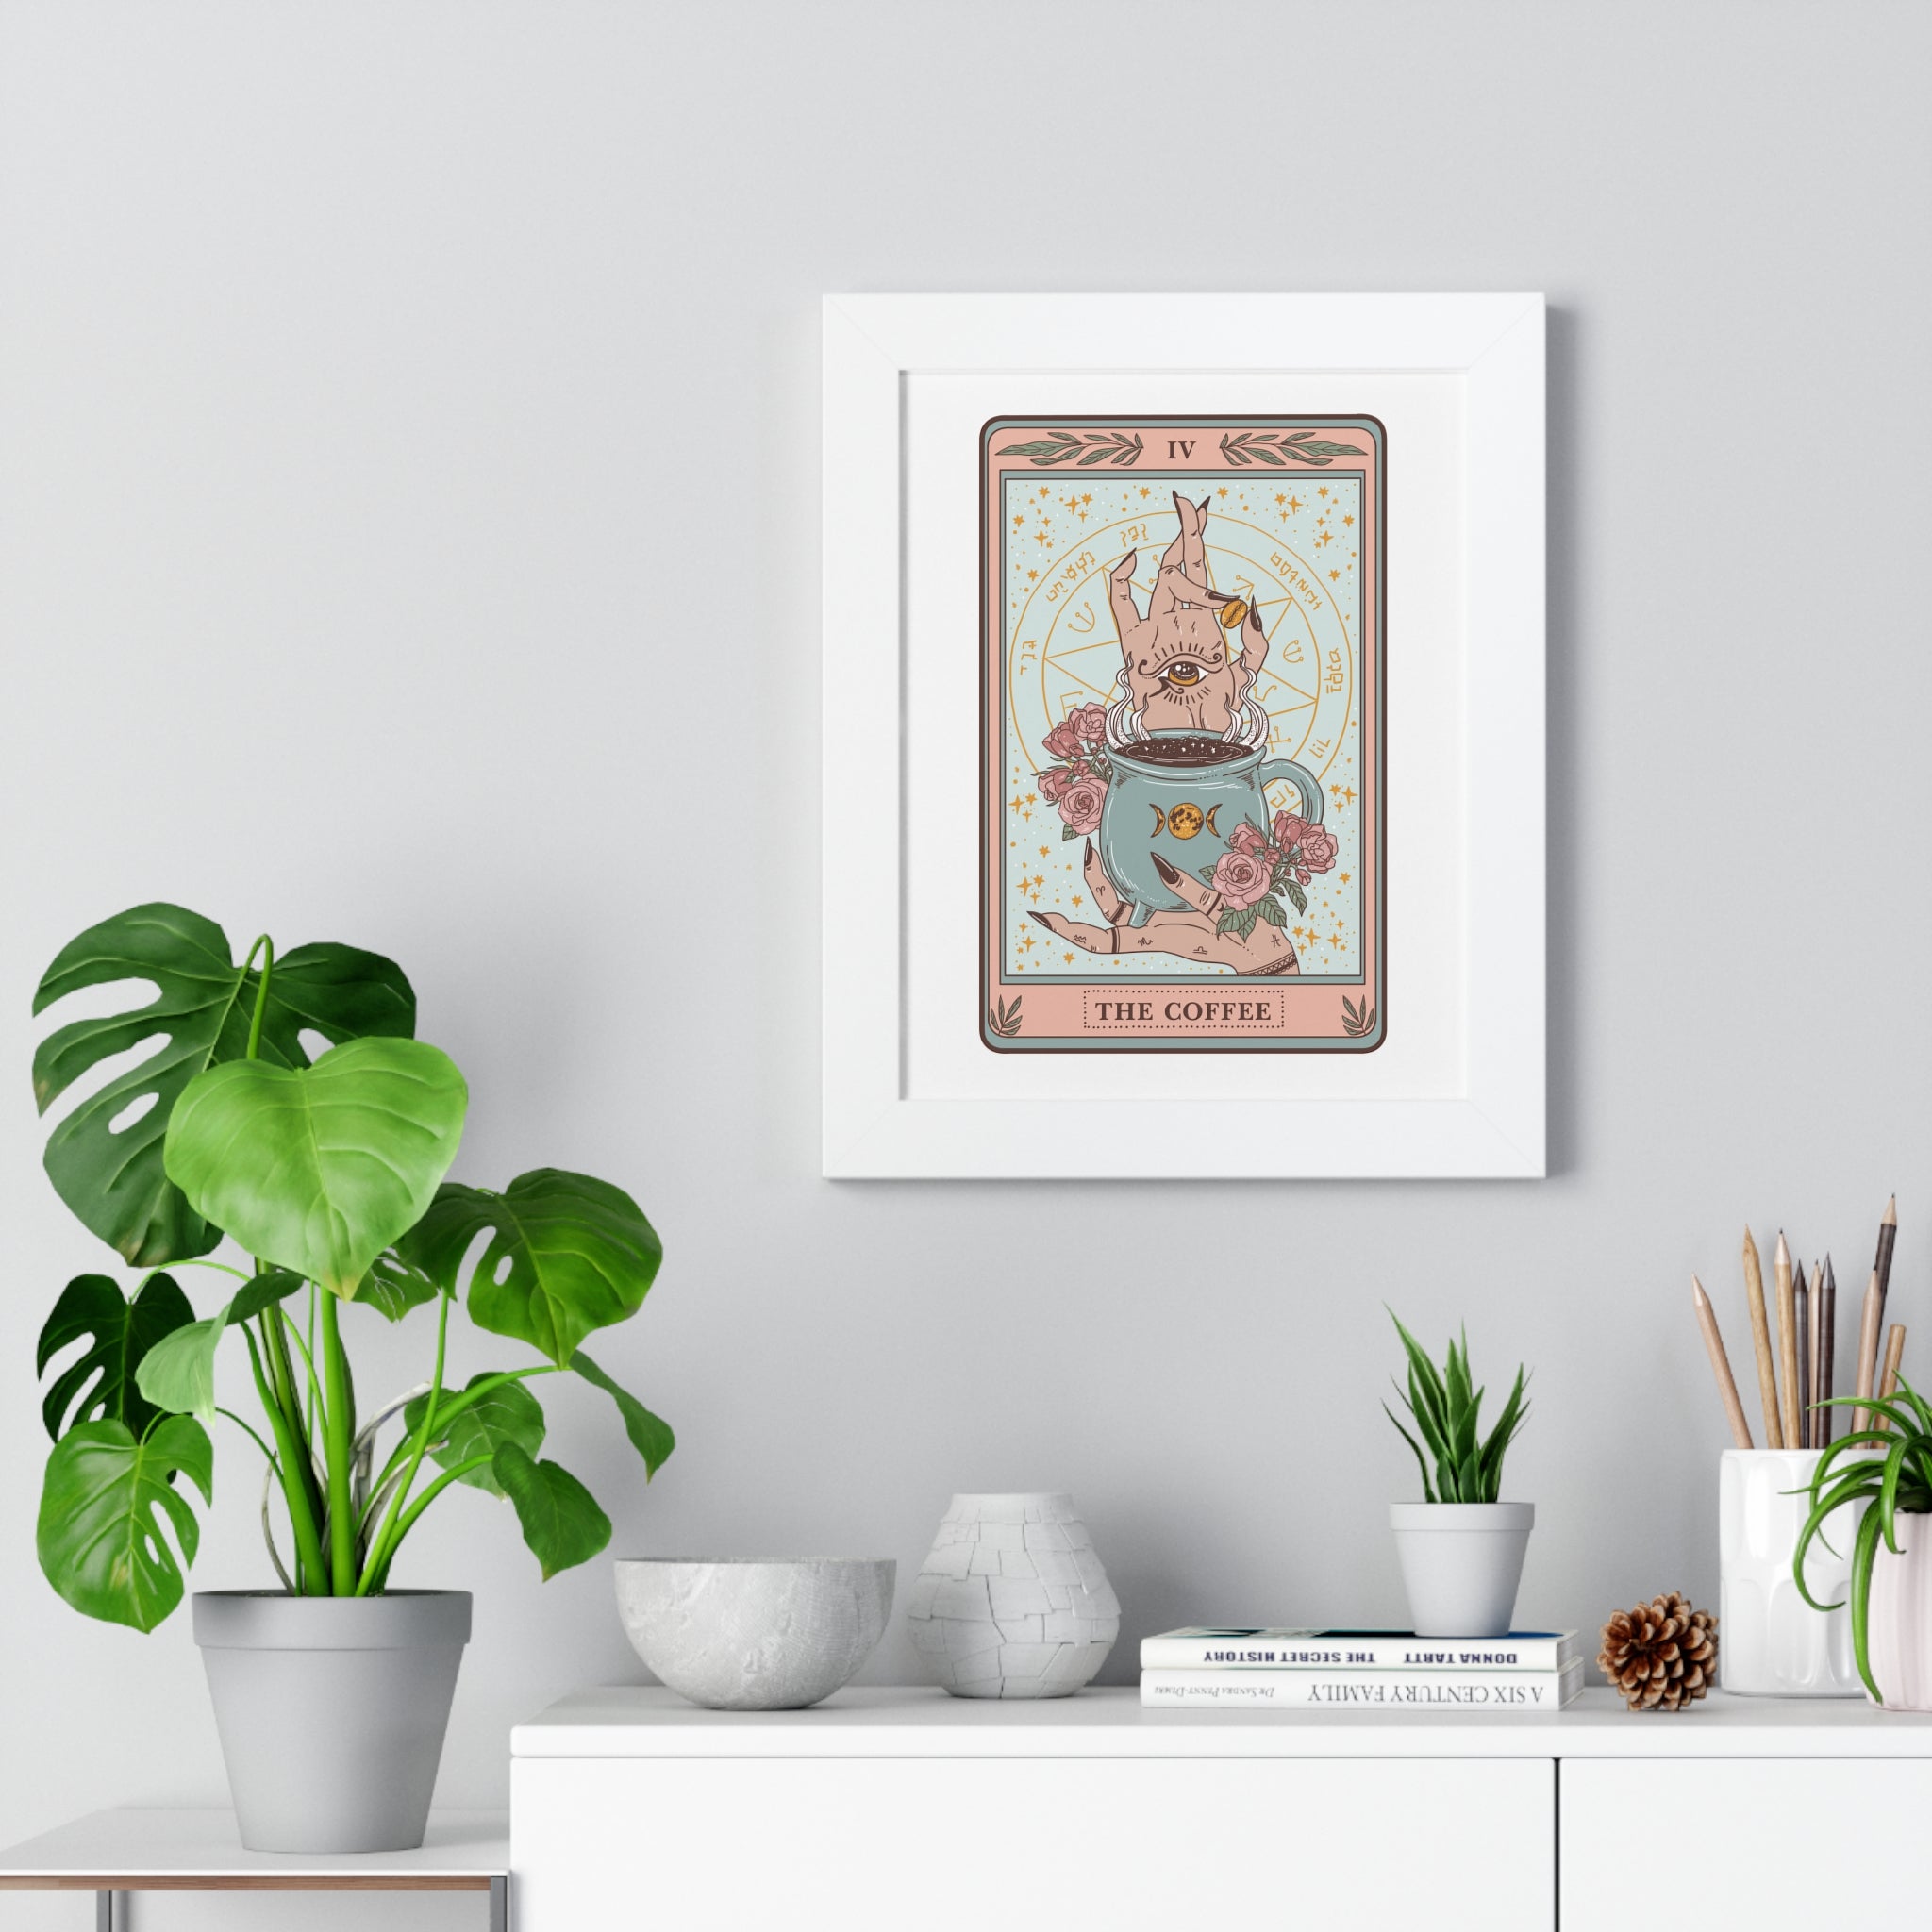 THE COFFEE // FRAMED POSTER PRINT